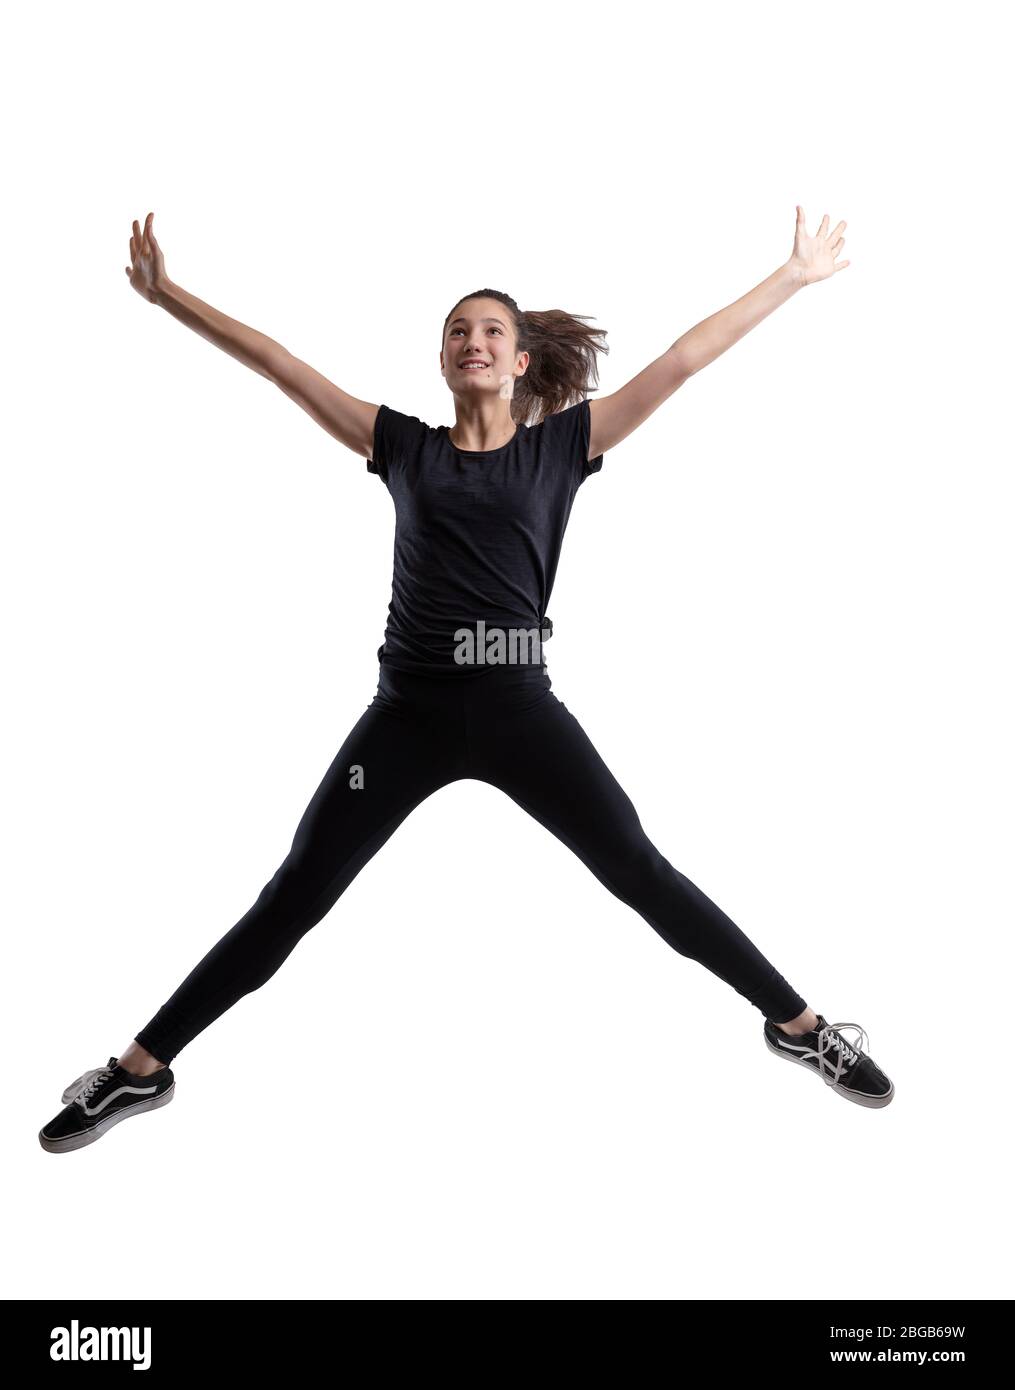 Athlete slender young woman leaping in the air with her arms and legs outstretched and a happy vivacious smile isolated on white in full length Stock Photo